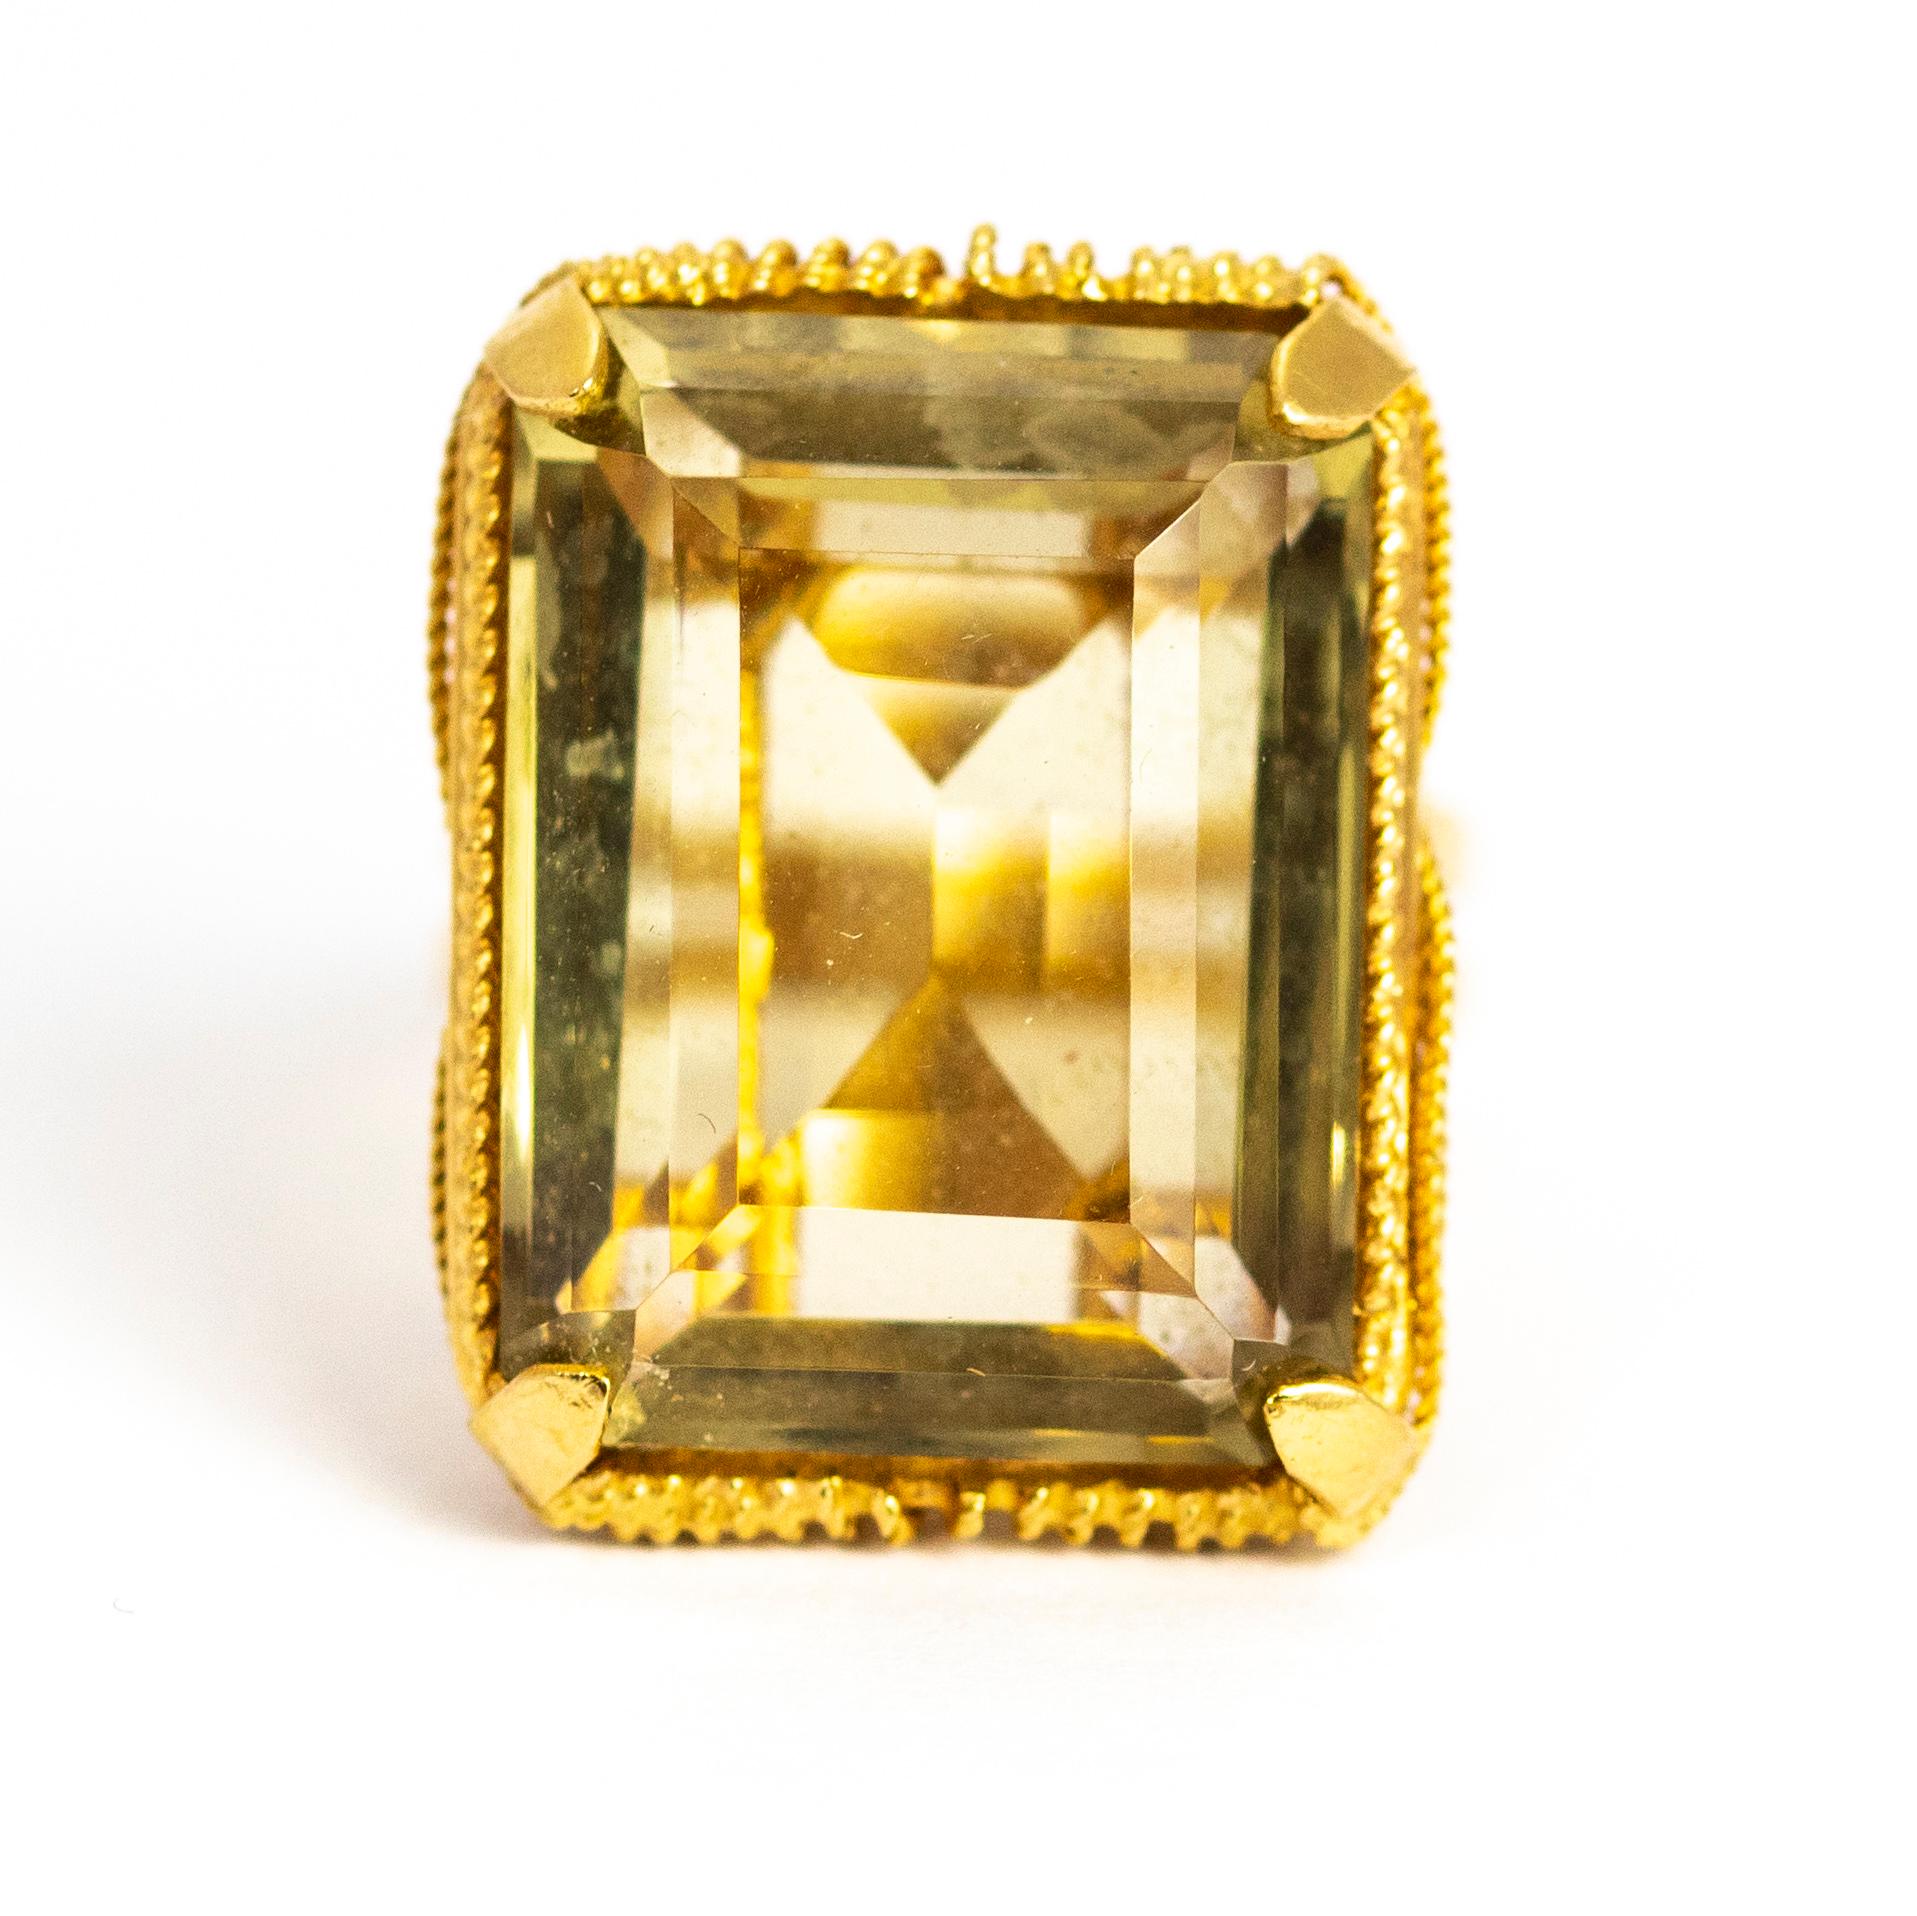 A wonderful vintage cocktail ring set with a beautiful large citrine. The gallery of this ring is set with spectacular rope motifs elegantly draped from the edges of the stone and crossing at the shoulders. The band also has a great split design. 